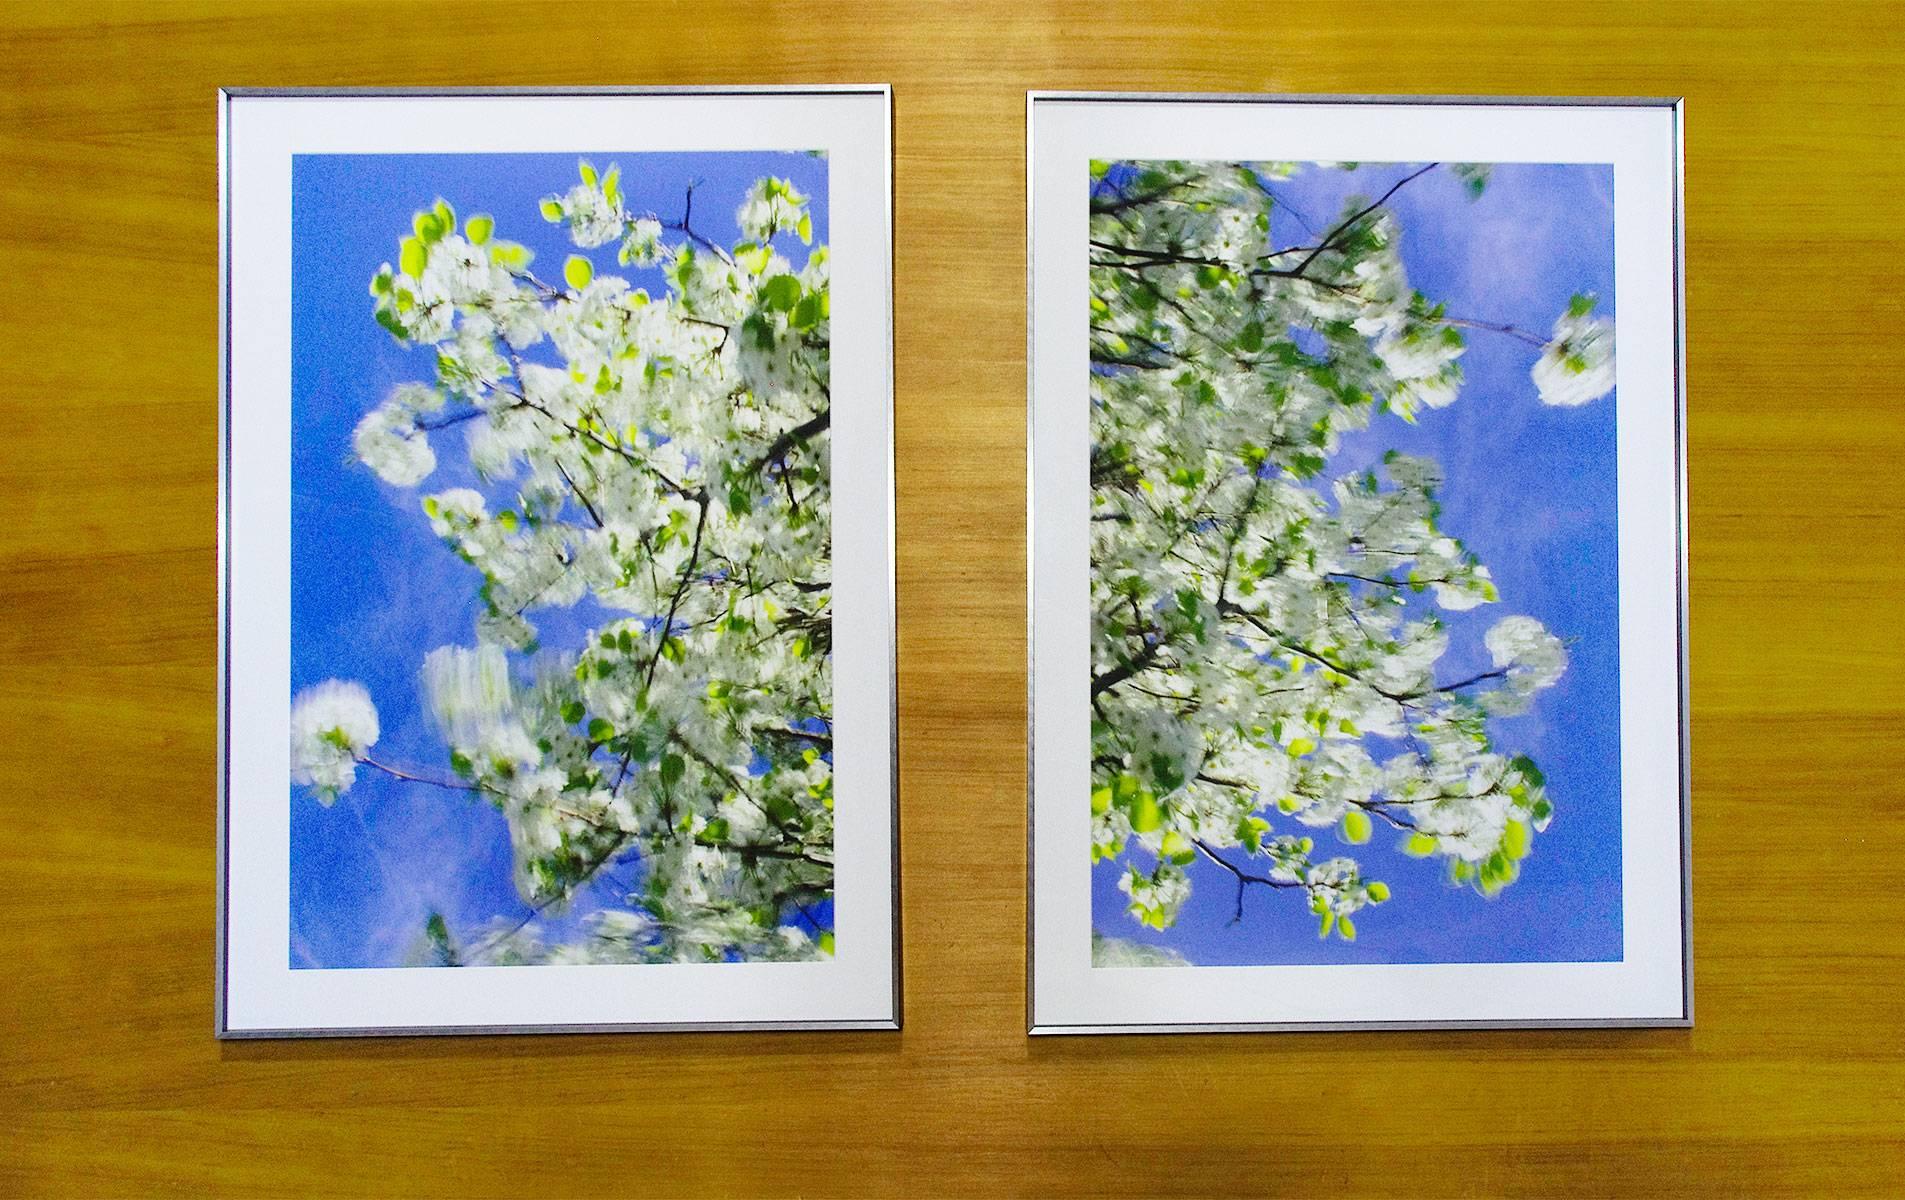 Clear air (green diptych #1) - Photograph by Edie Winograde